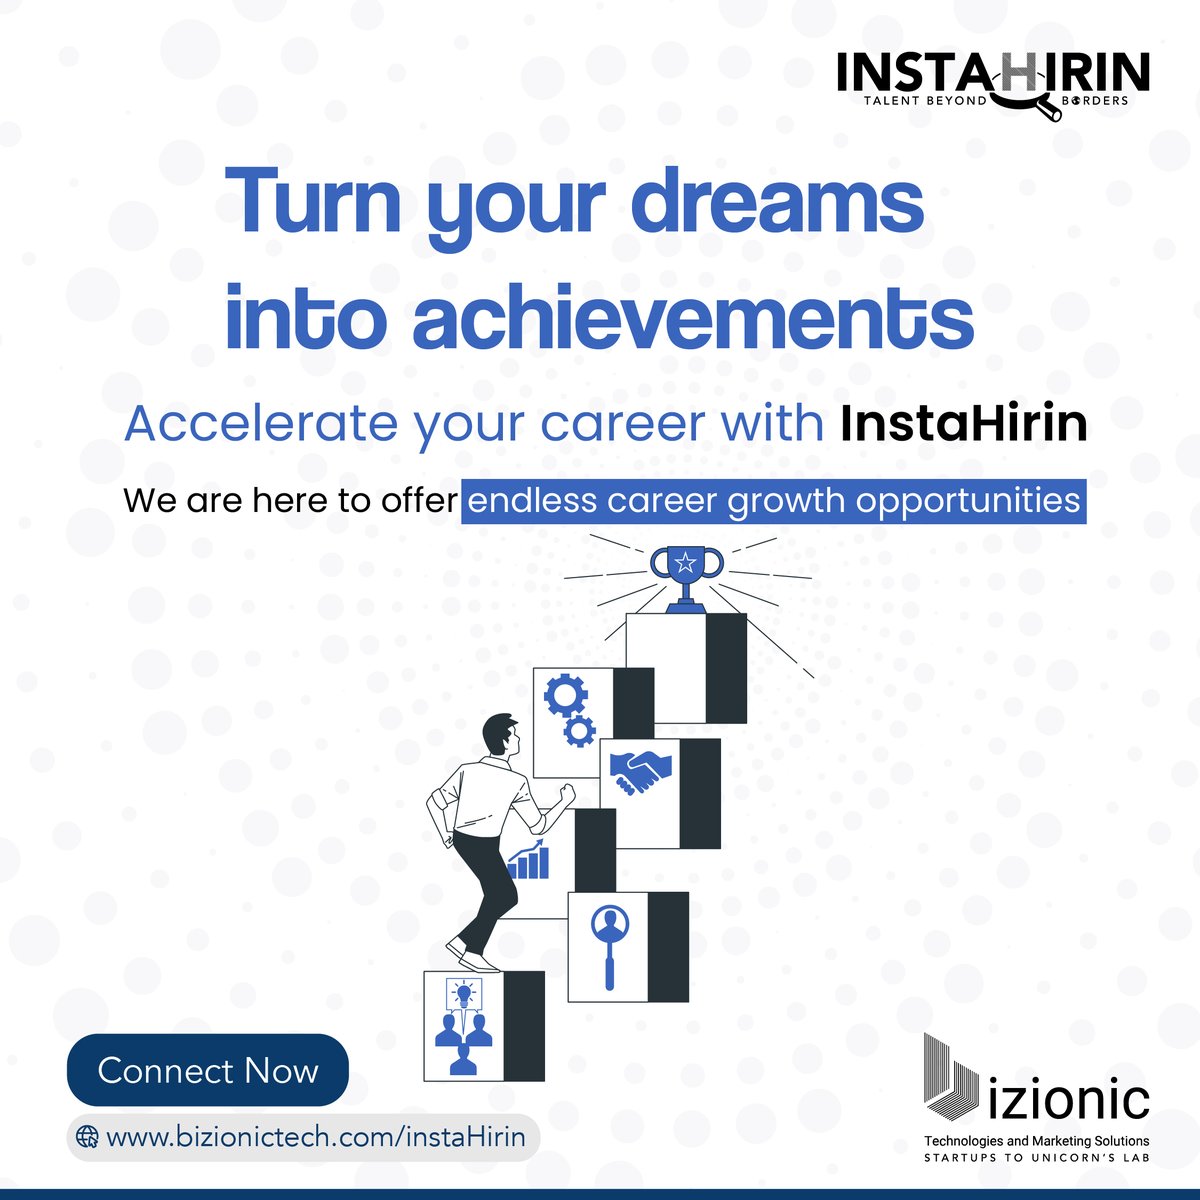 Ready to turn your dreams into achievements? 🚀 Join InstaHirin and accelerate your career today!

Register Now: bizionictech.com/instaHirin
Follow Us: @instahirin 

#employmentopportunities #jobssearch #successincareer #dreamsjob #careeradvancements #jobsopportunities @IndianJobsCO